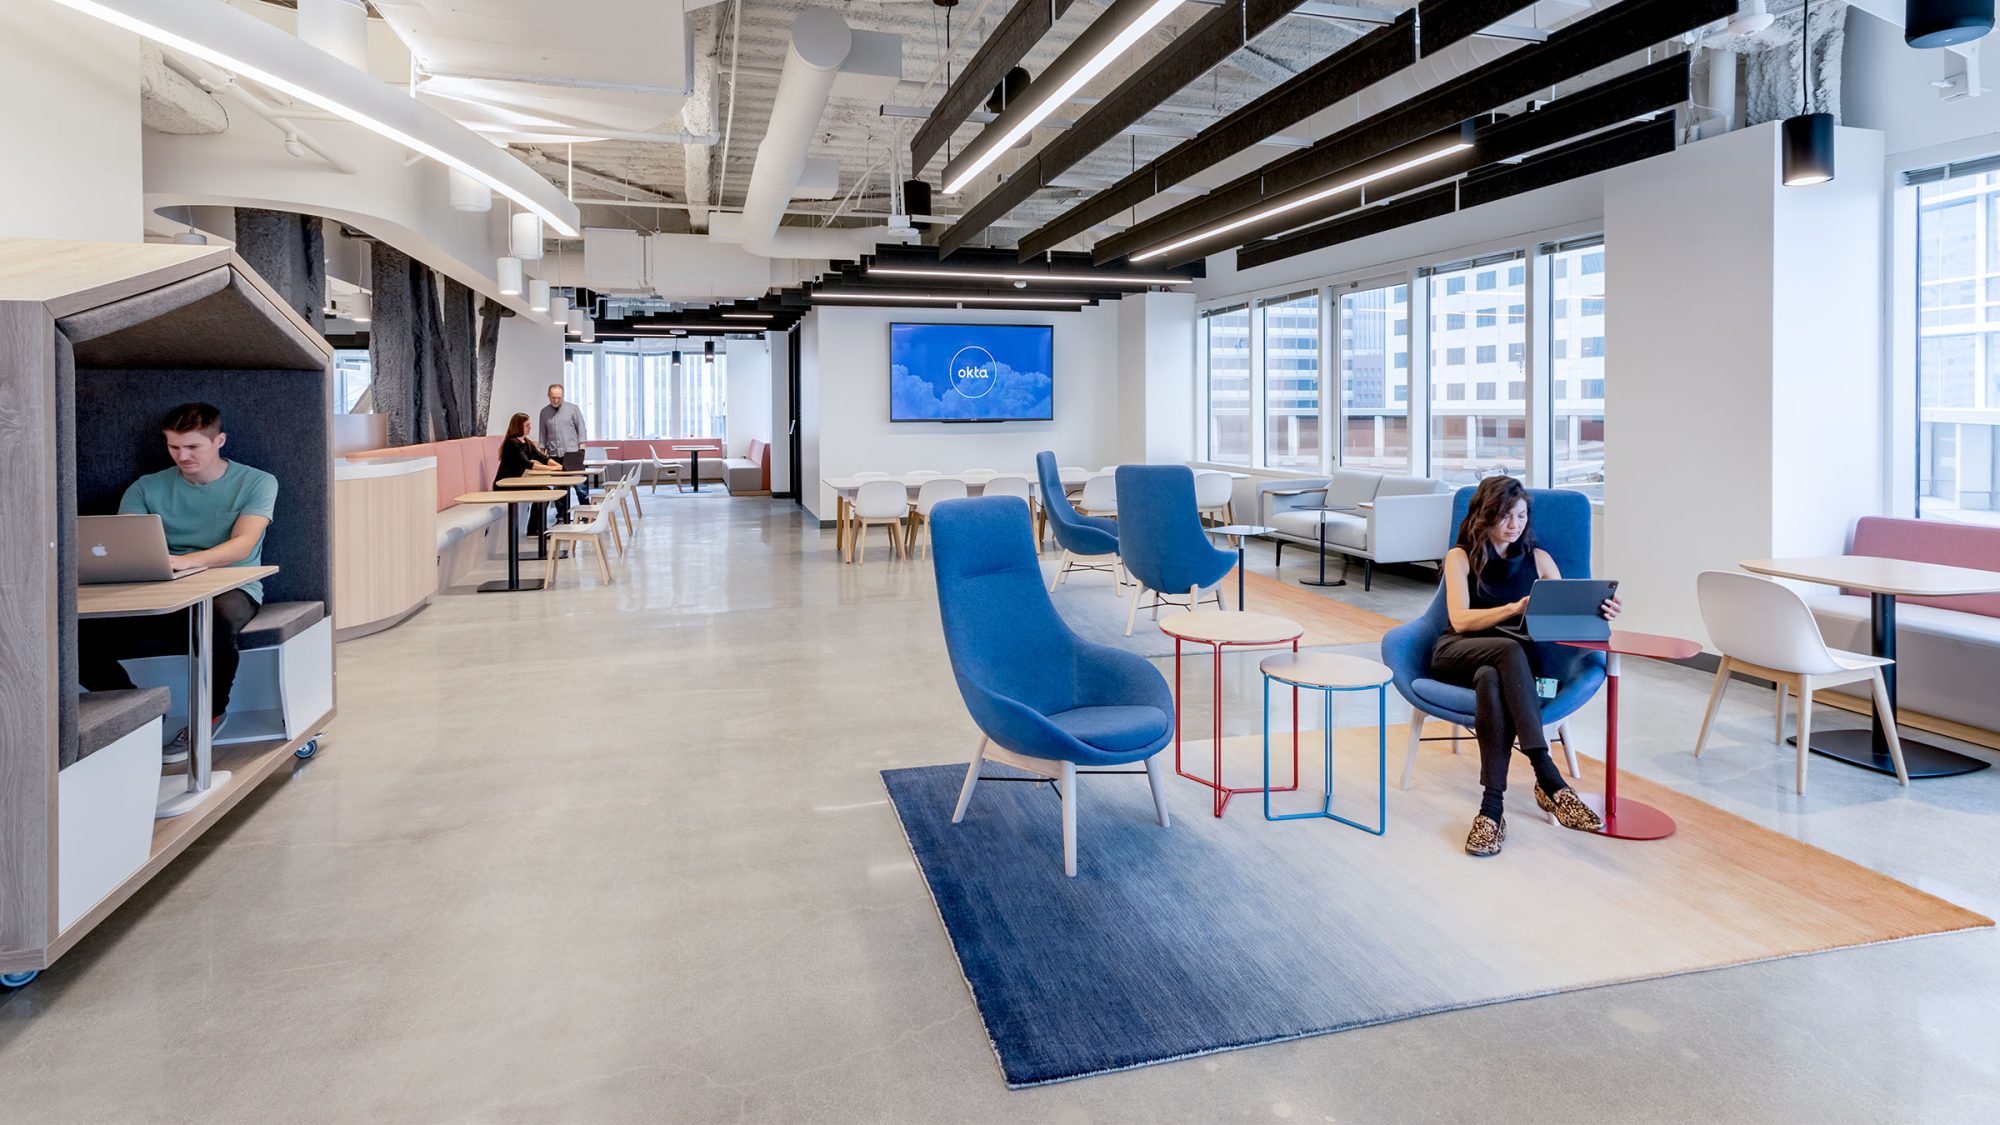 Workplace design in San Francisco by M Moser Associates featuring open plan concept and welcoming interior design.